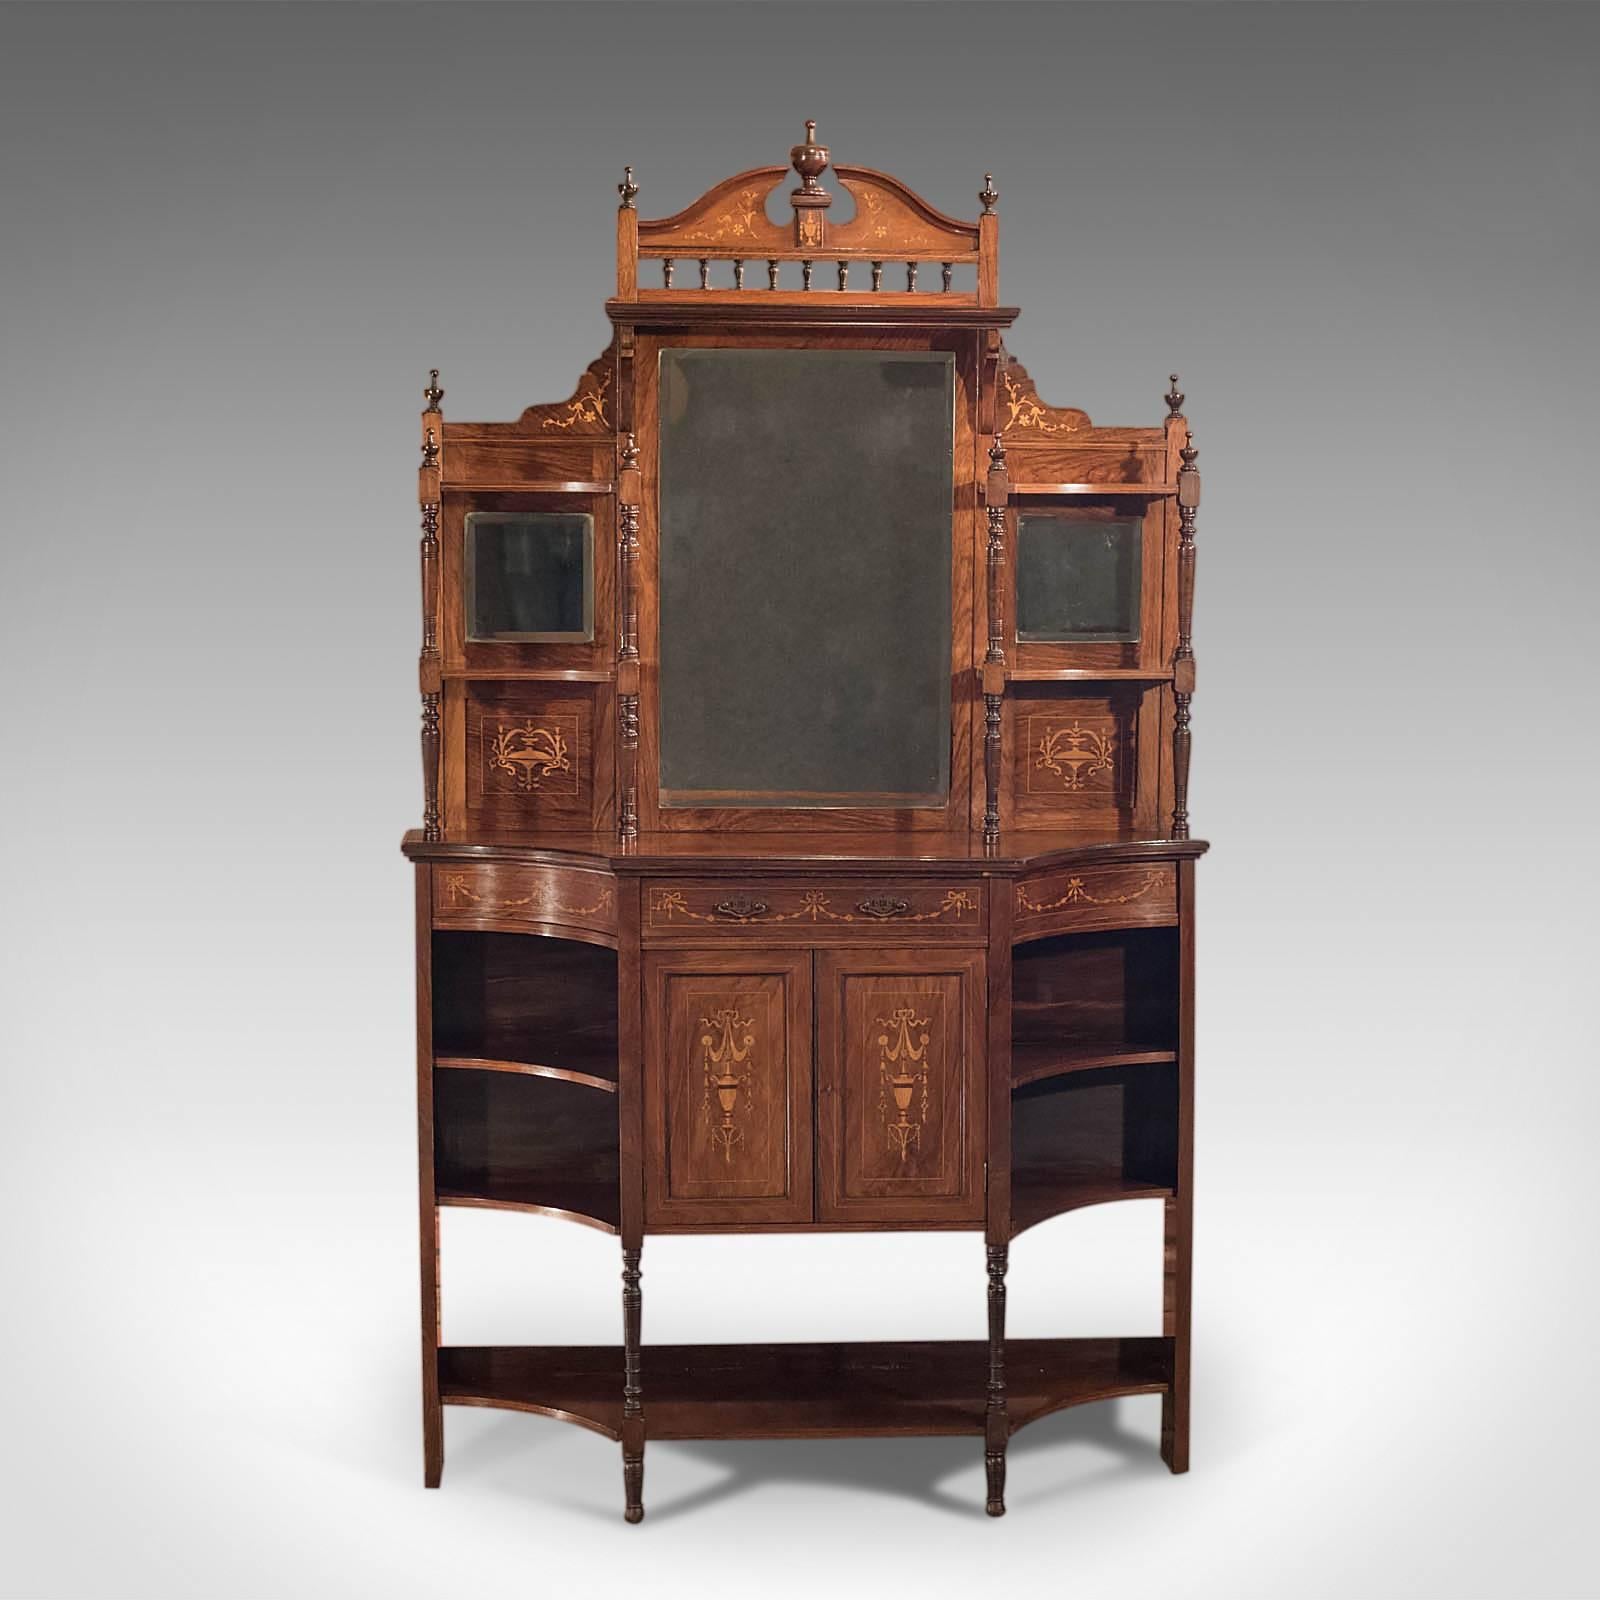 This is an antique, Edwardian mirror back sideboard dating to the early 20th century, circa 1910.

Adorned with finals and classical motif in the boxwood inlay featuring urns, garlands and swags lend this piece the Greco overtones favored at the